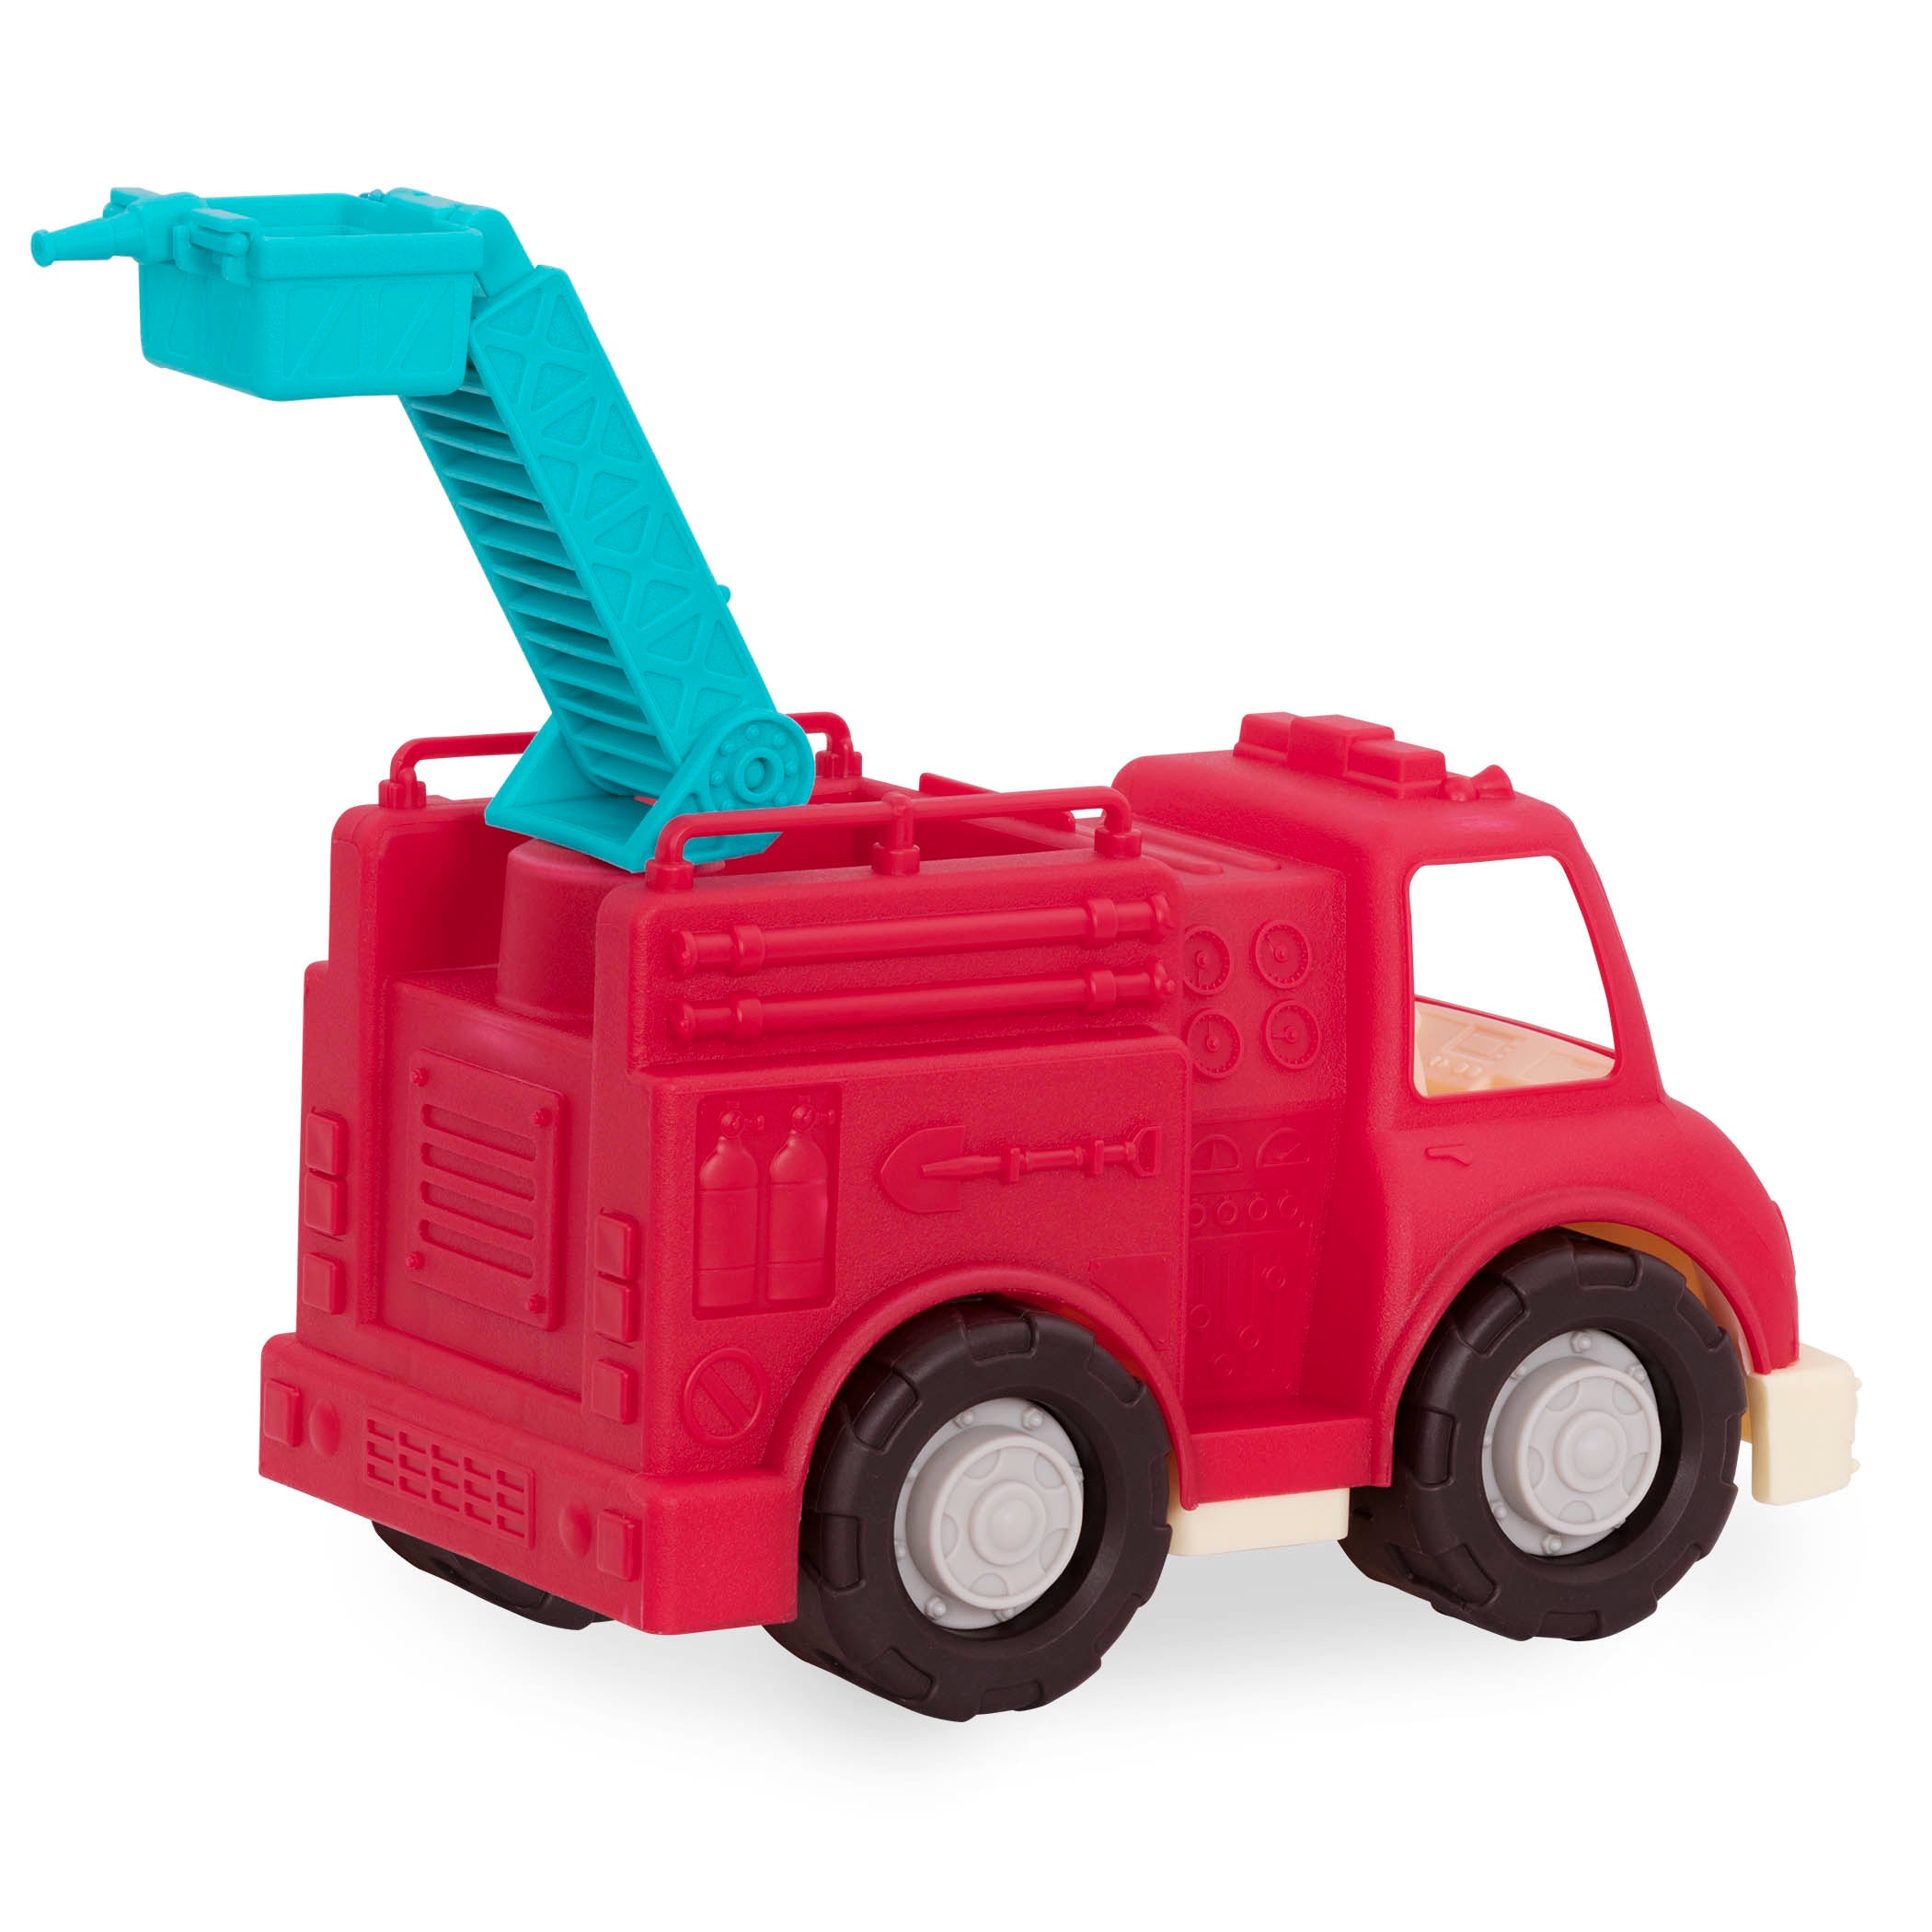 Toy fire truck.